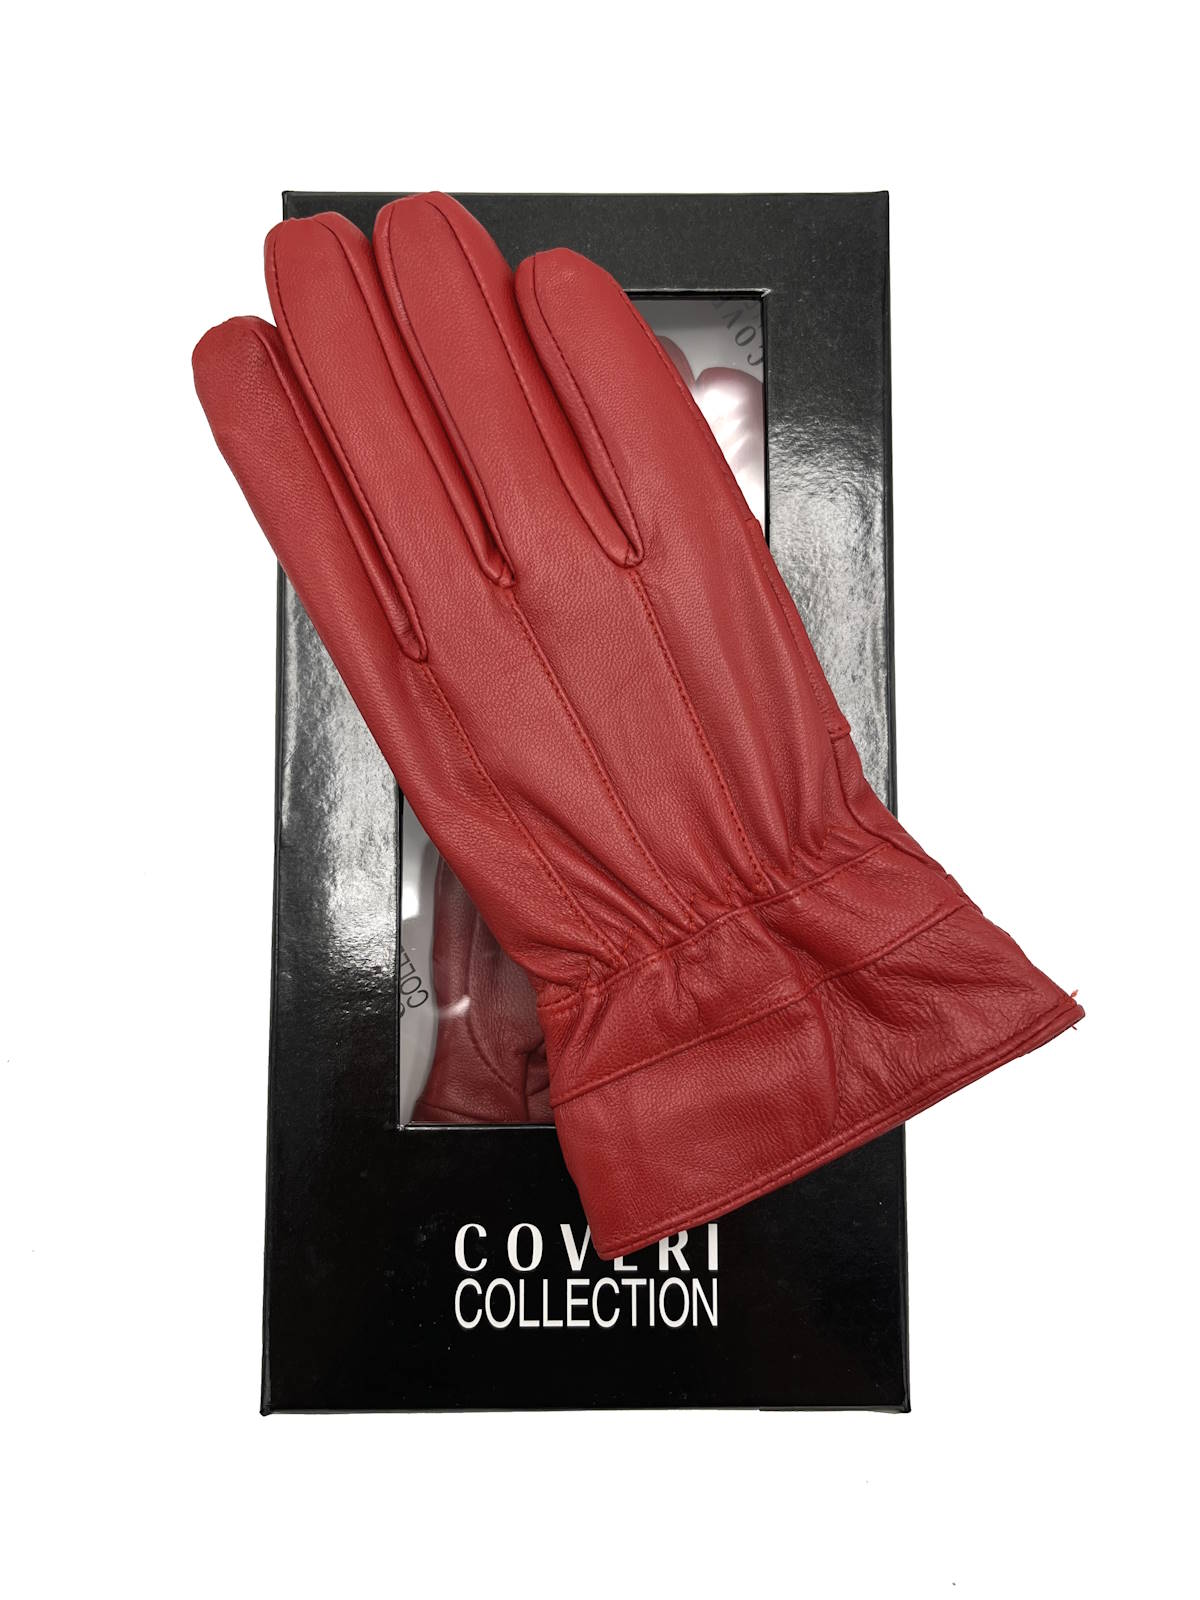 Leather gloves for women, gift box, brand Coveri Collection,art. 189122.155